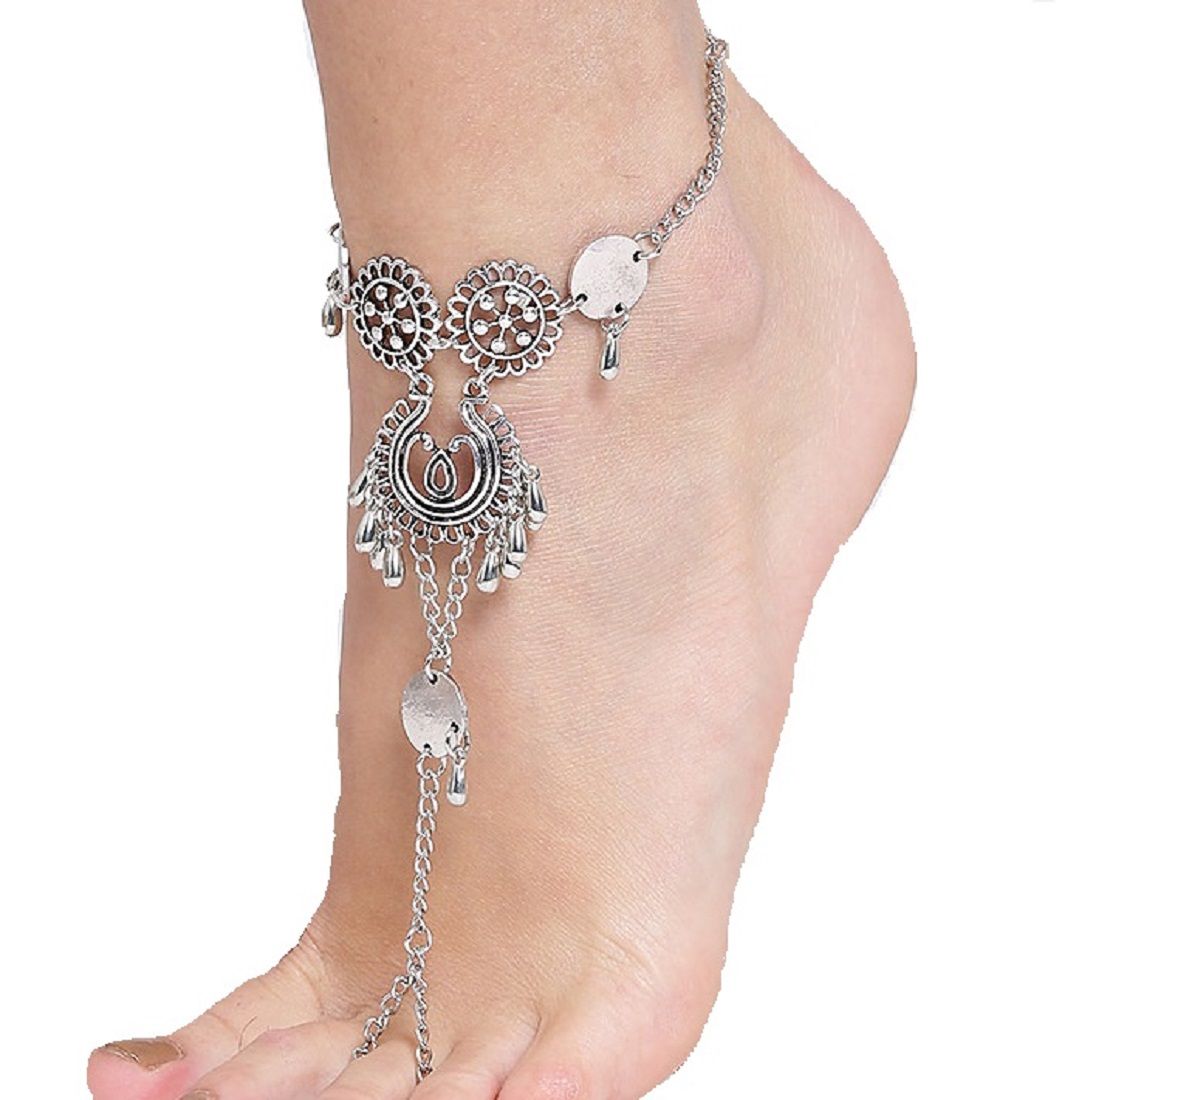 Gothic Style Gold Silver Color Chain Toe Ring Anklets Summer Fashion Simple  On Leg Ankle Anklets For Women Boho Foot Jewelry - Anklets - AliExpress